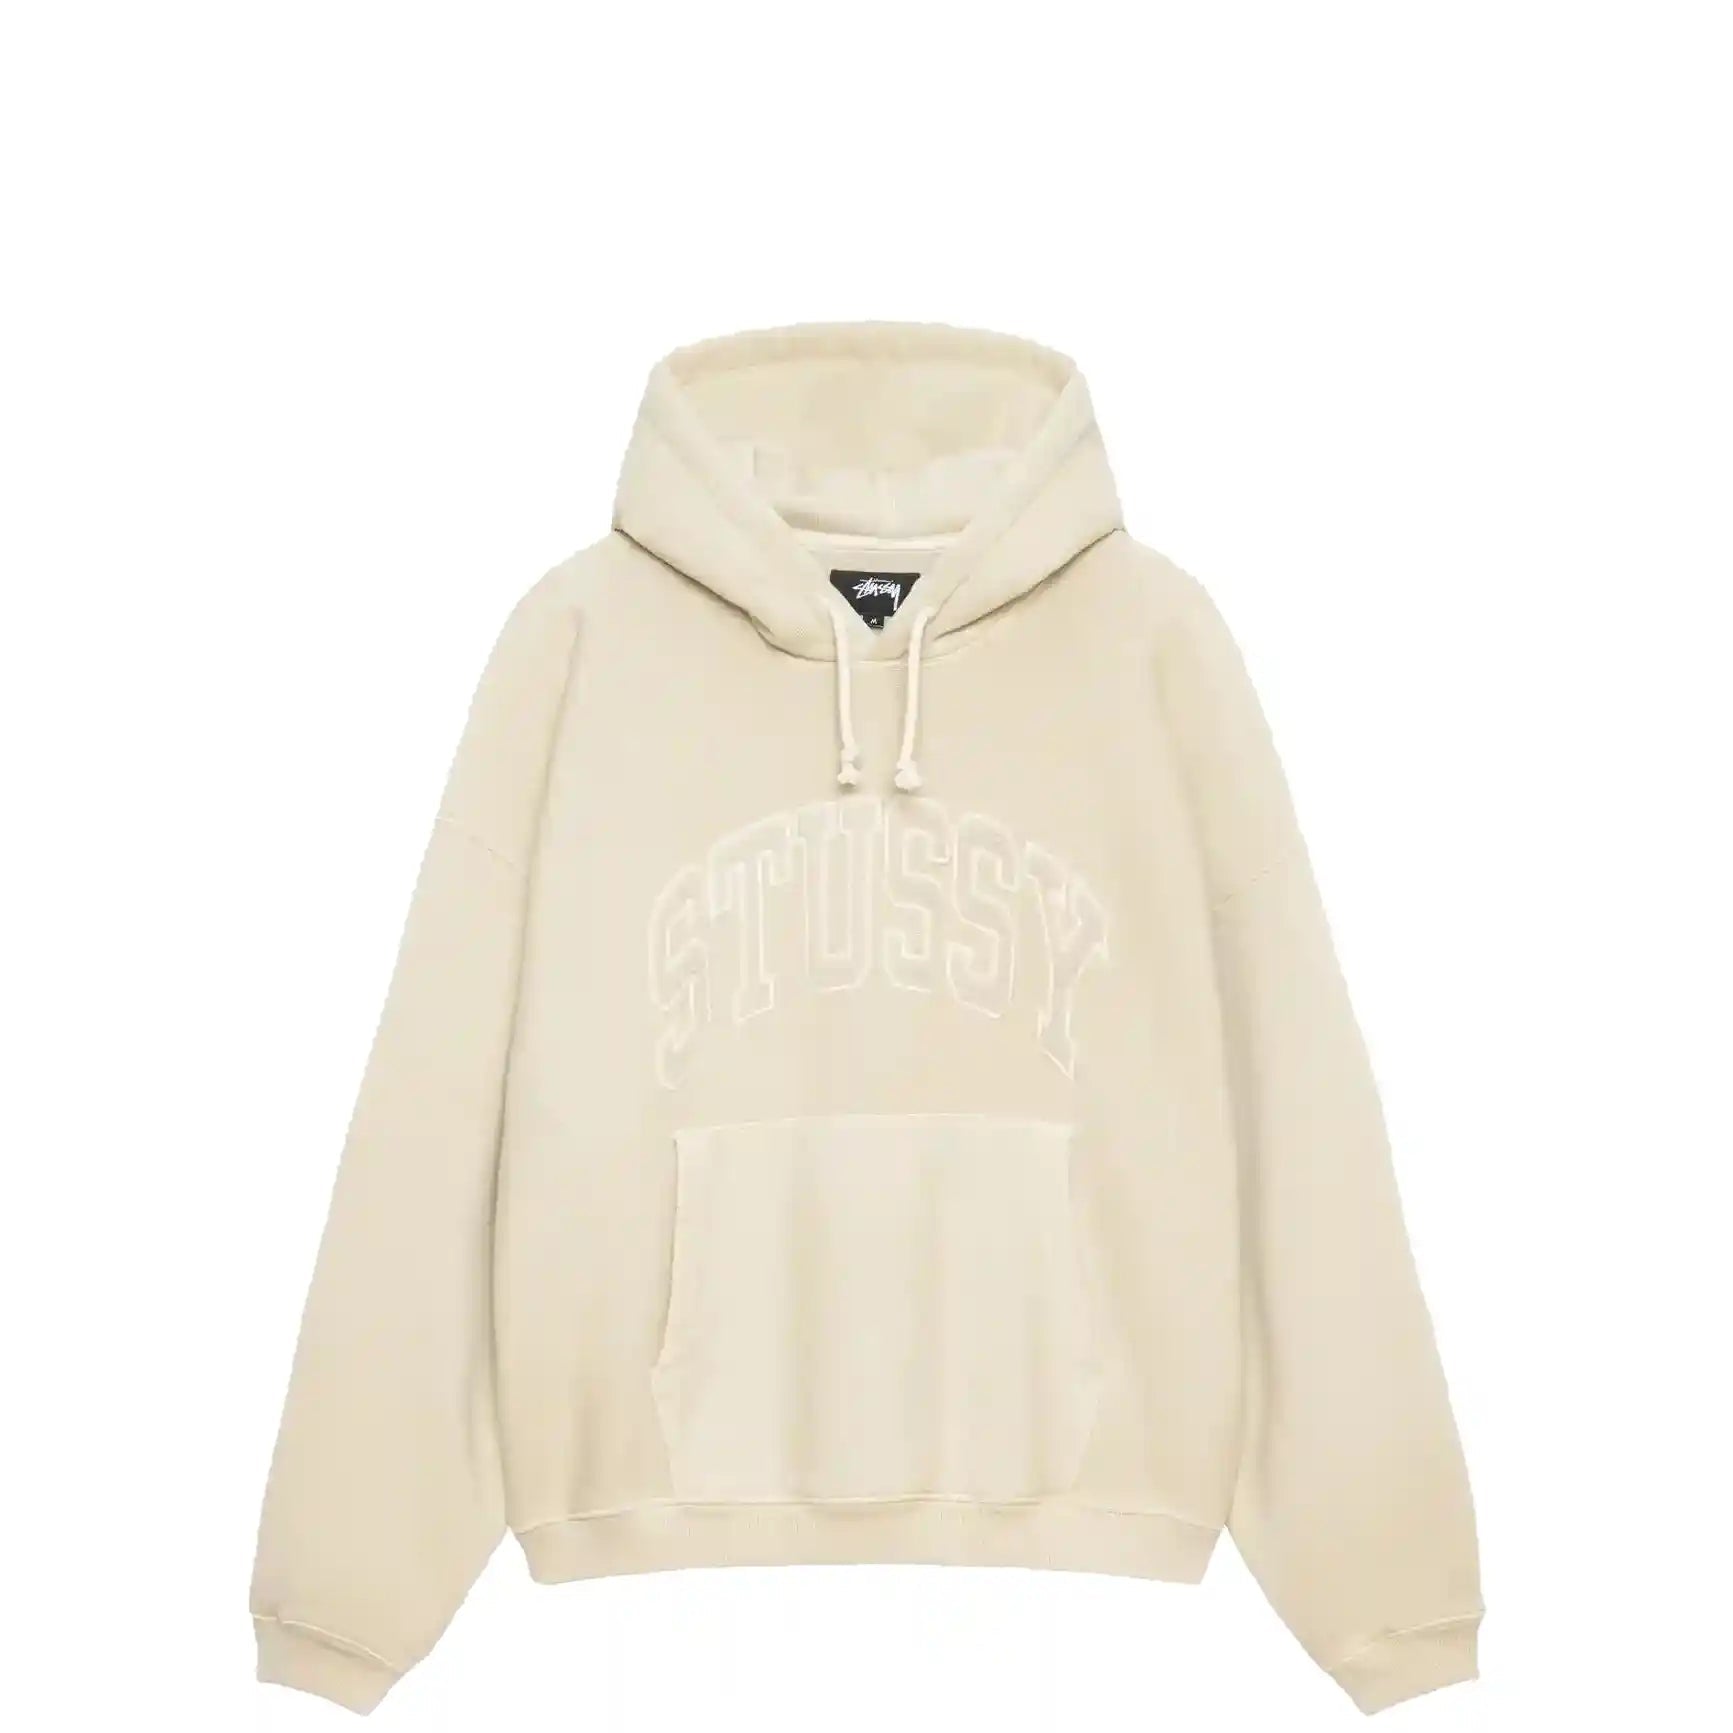 Stussy Embroidered Relaxed Hood, sand - Tiki Room Skateboards - 1